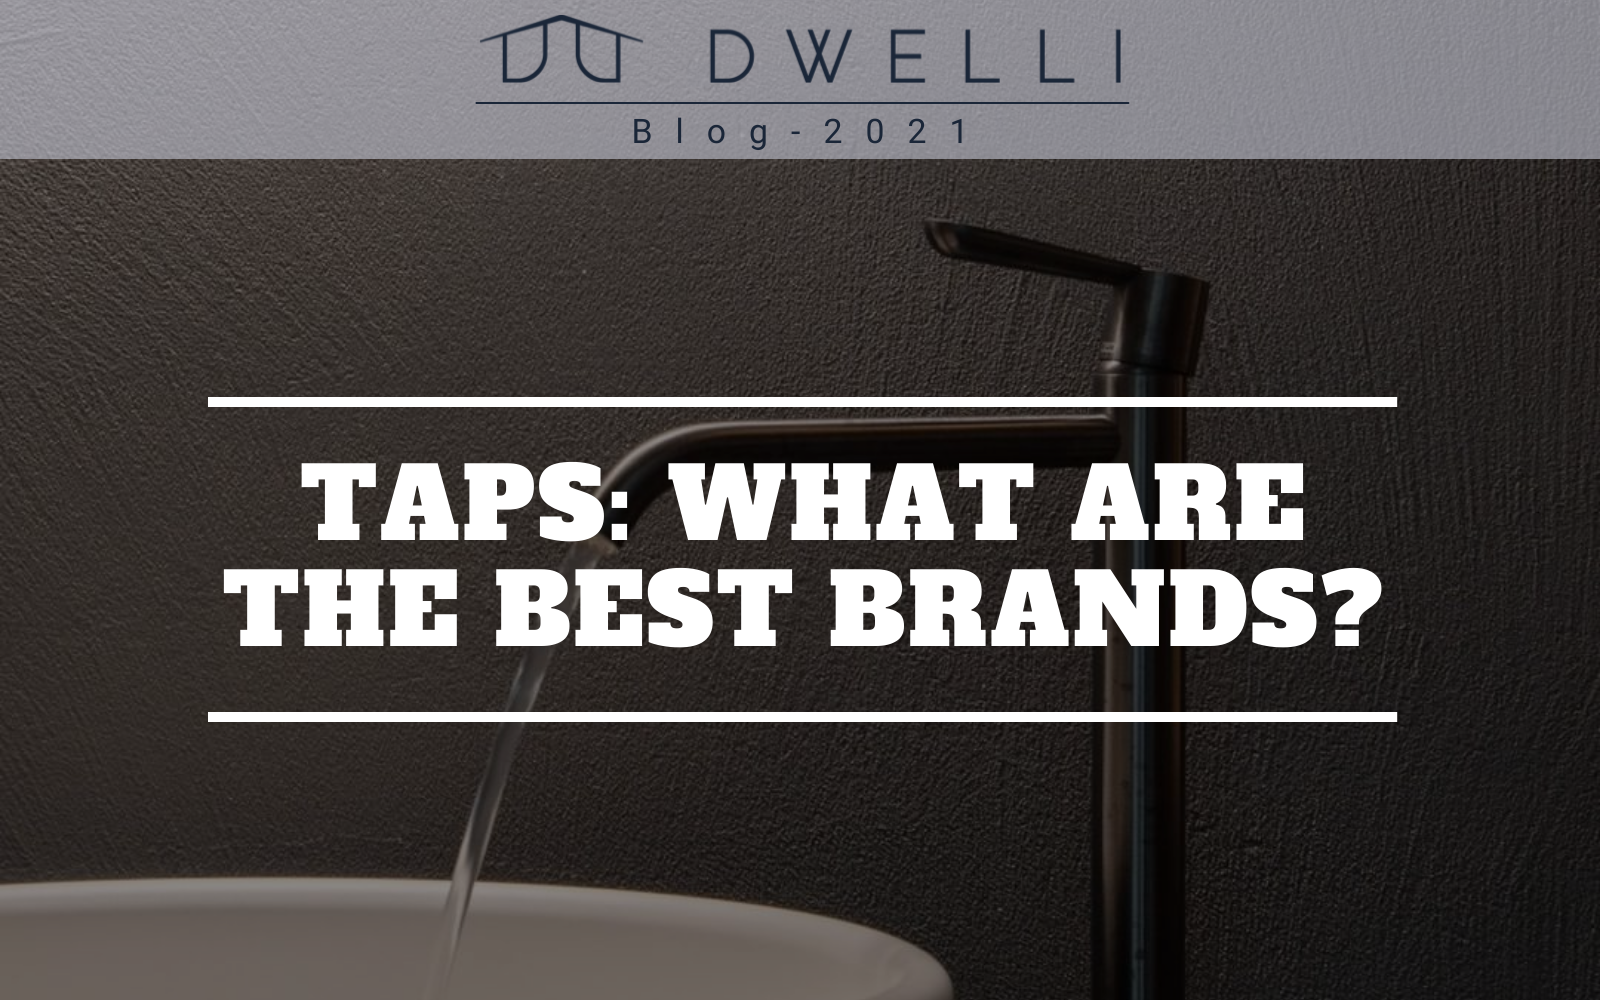 Taps: what are the best brands?